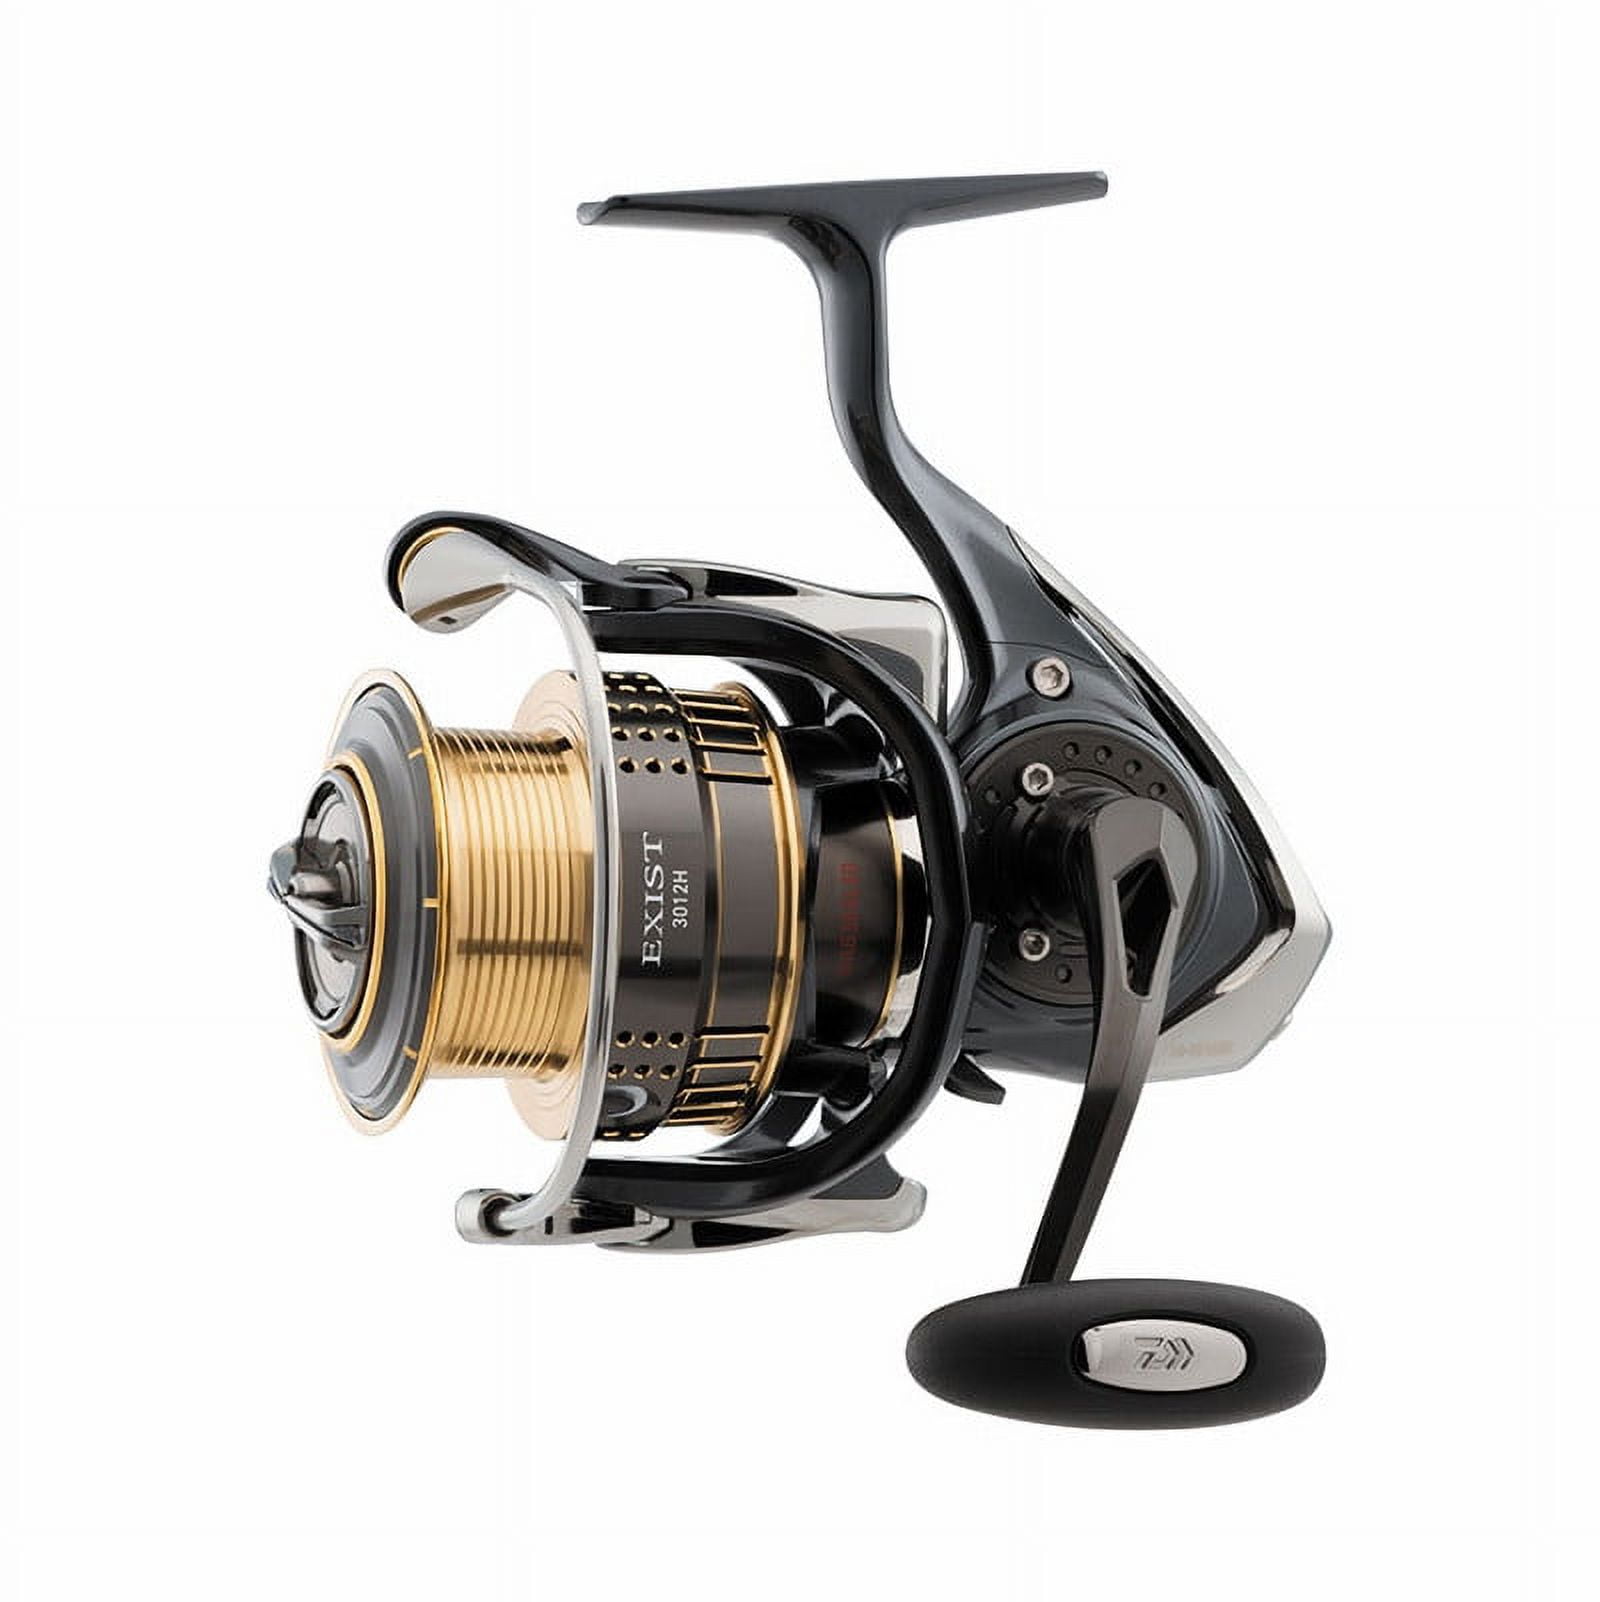 Daiwa EXIST EXIST3012H 8-12lbs test Spinning Reel